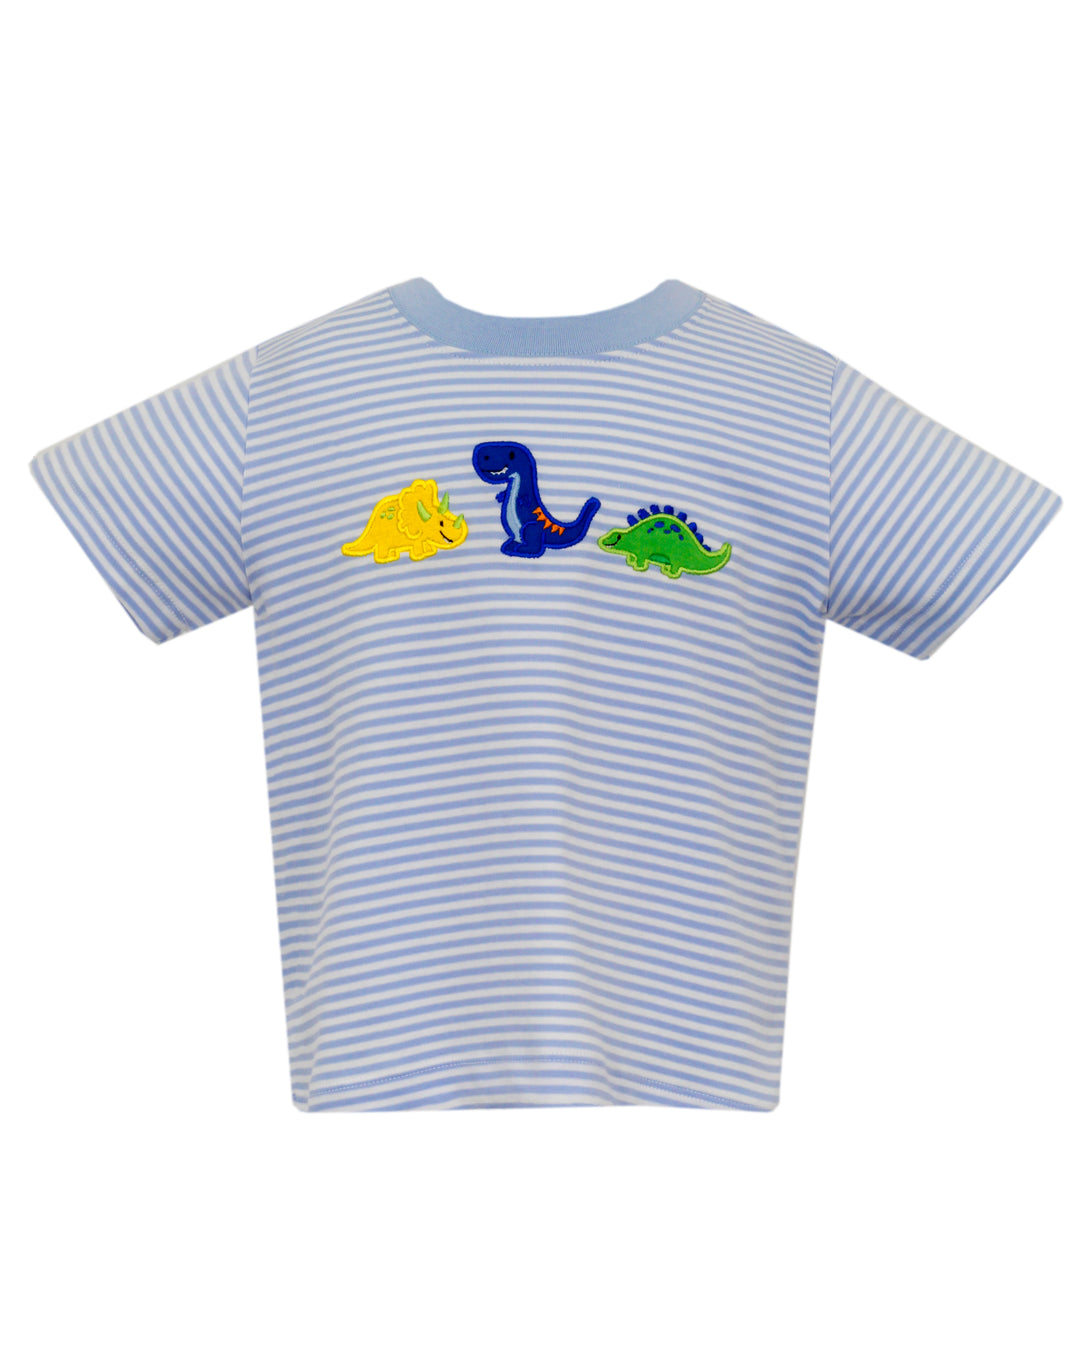 Knit Stripe Tee with Dino Applique